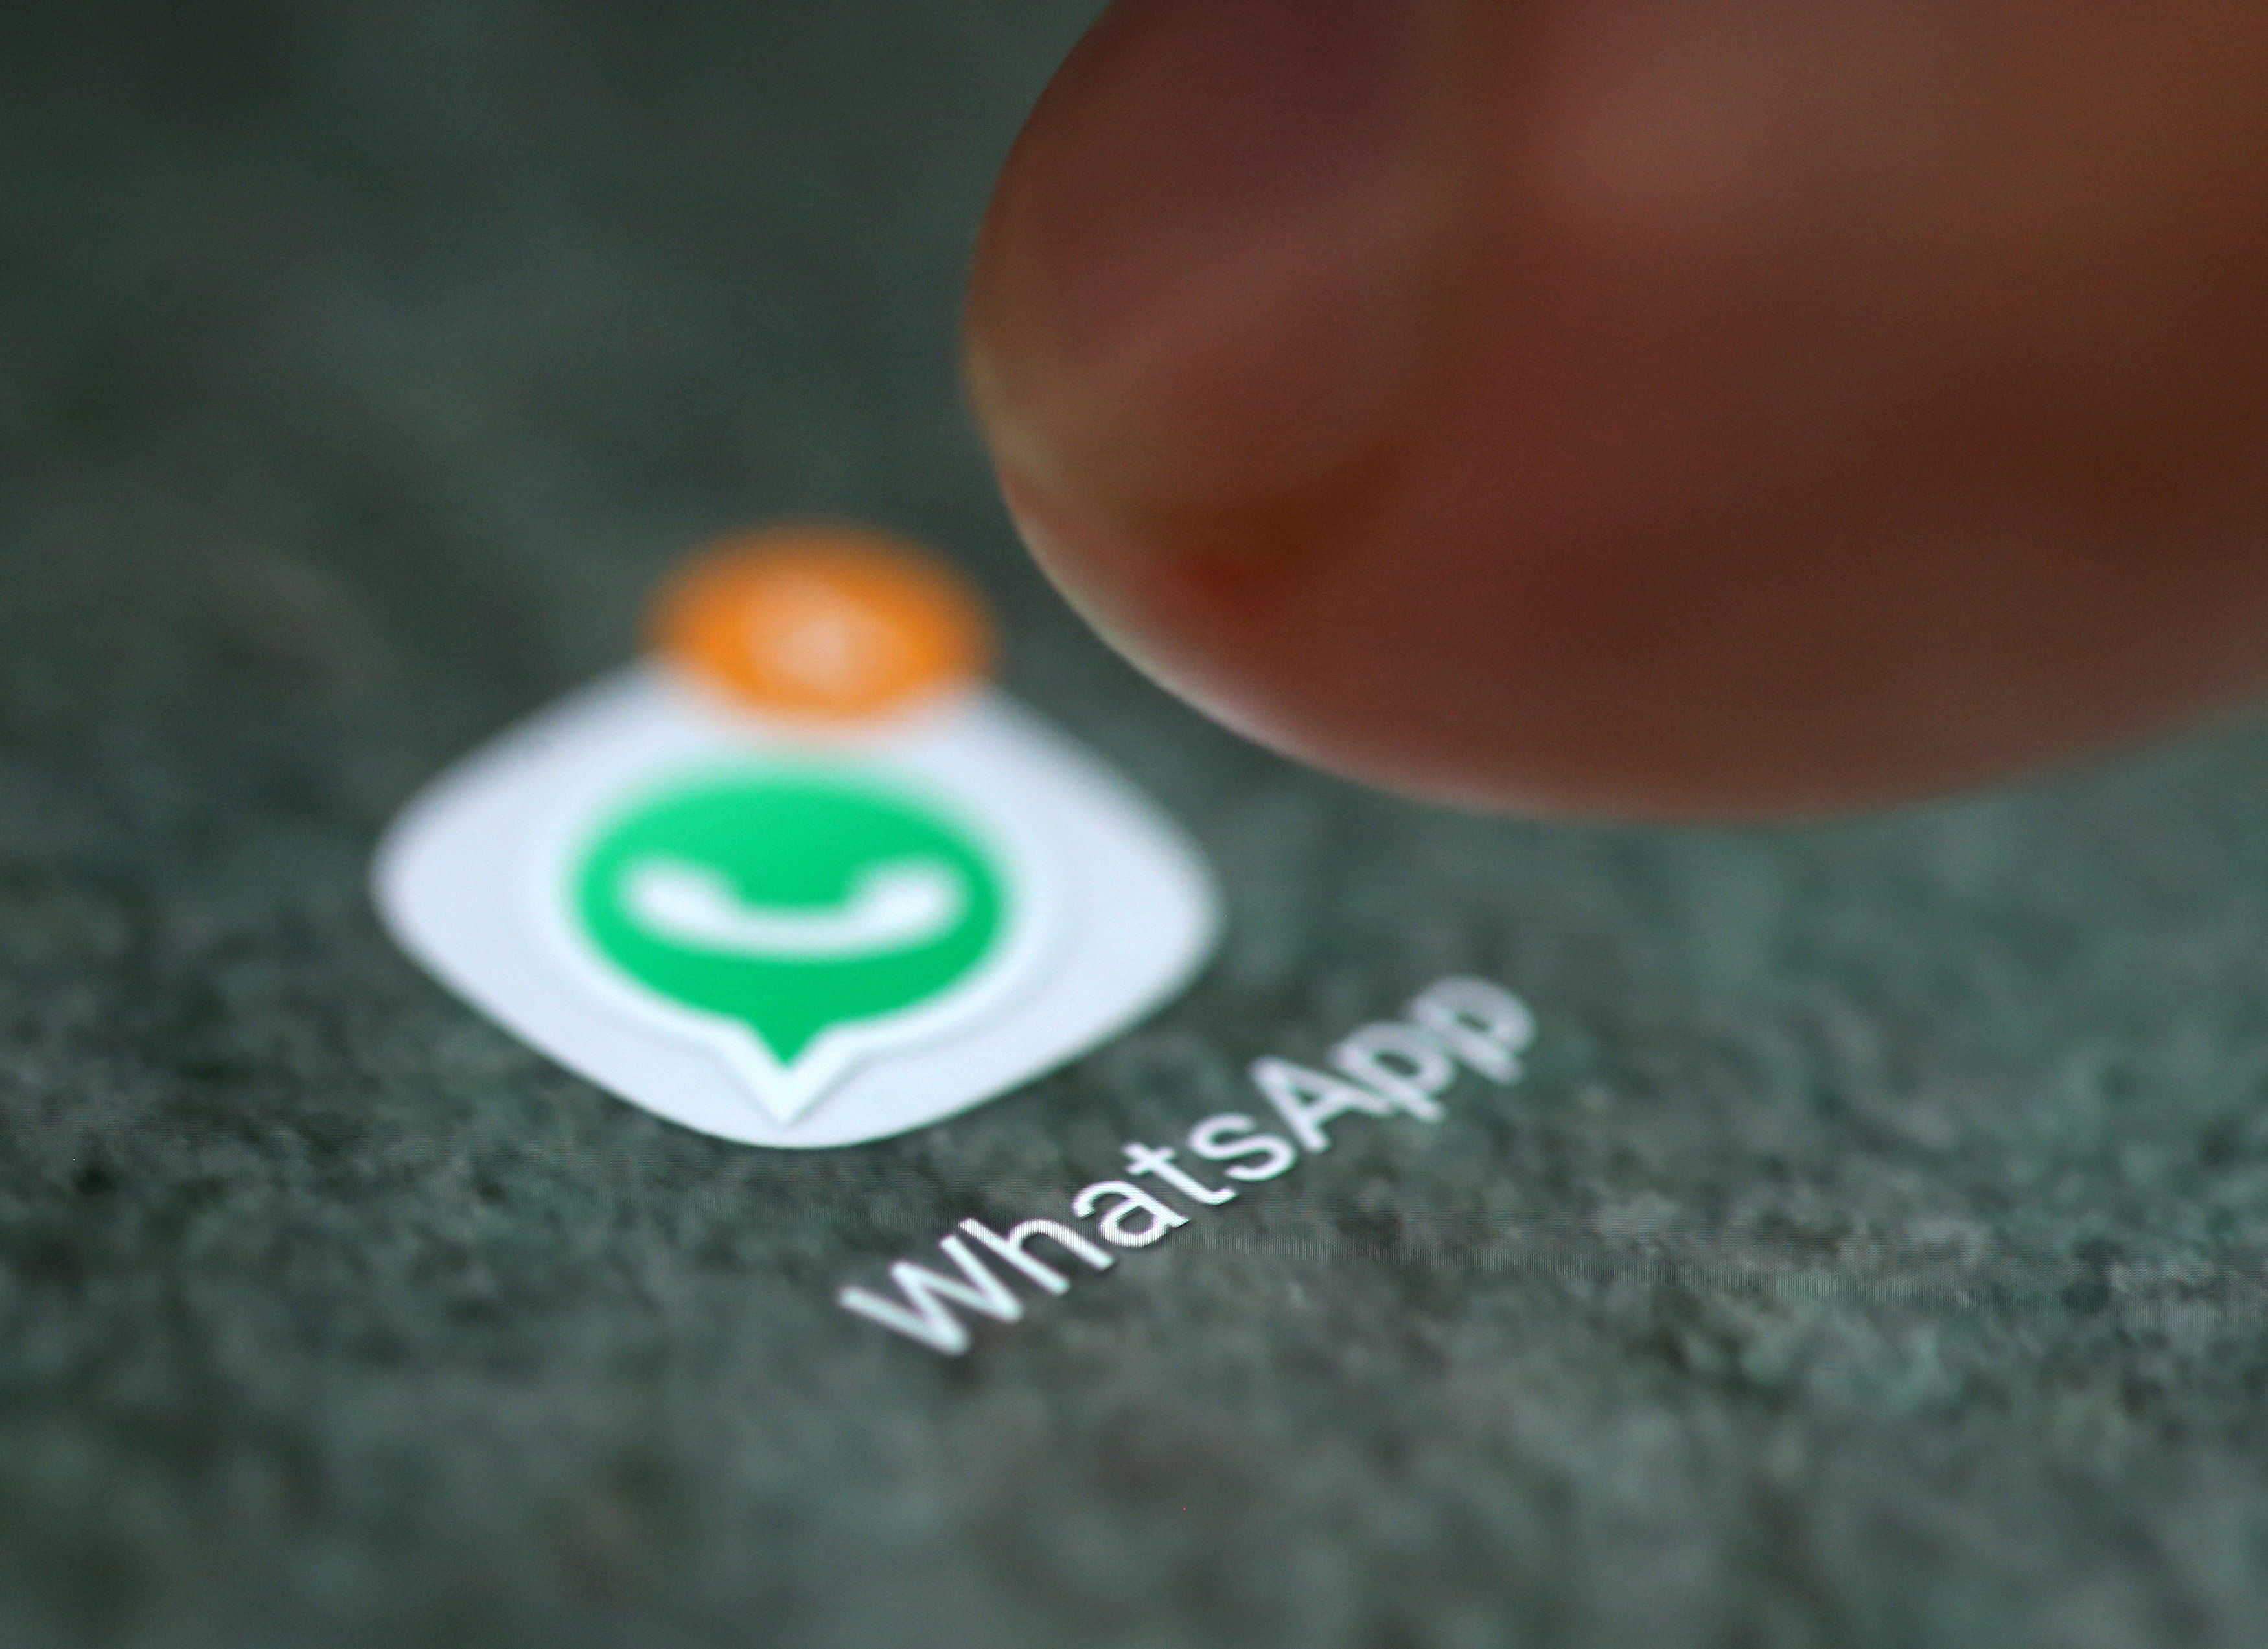 WhatsApp will no longer work on thousands of phones from December 31, 2019 (Reuters File Photo)